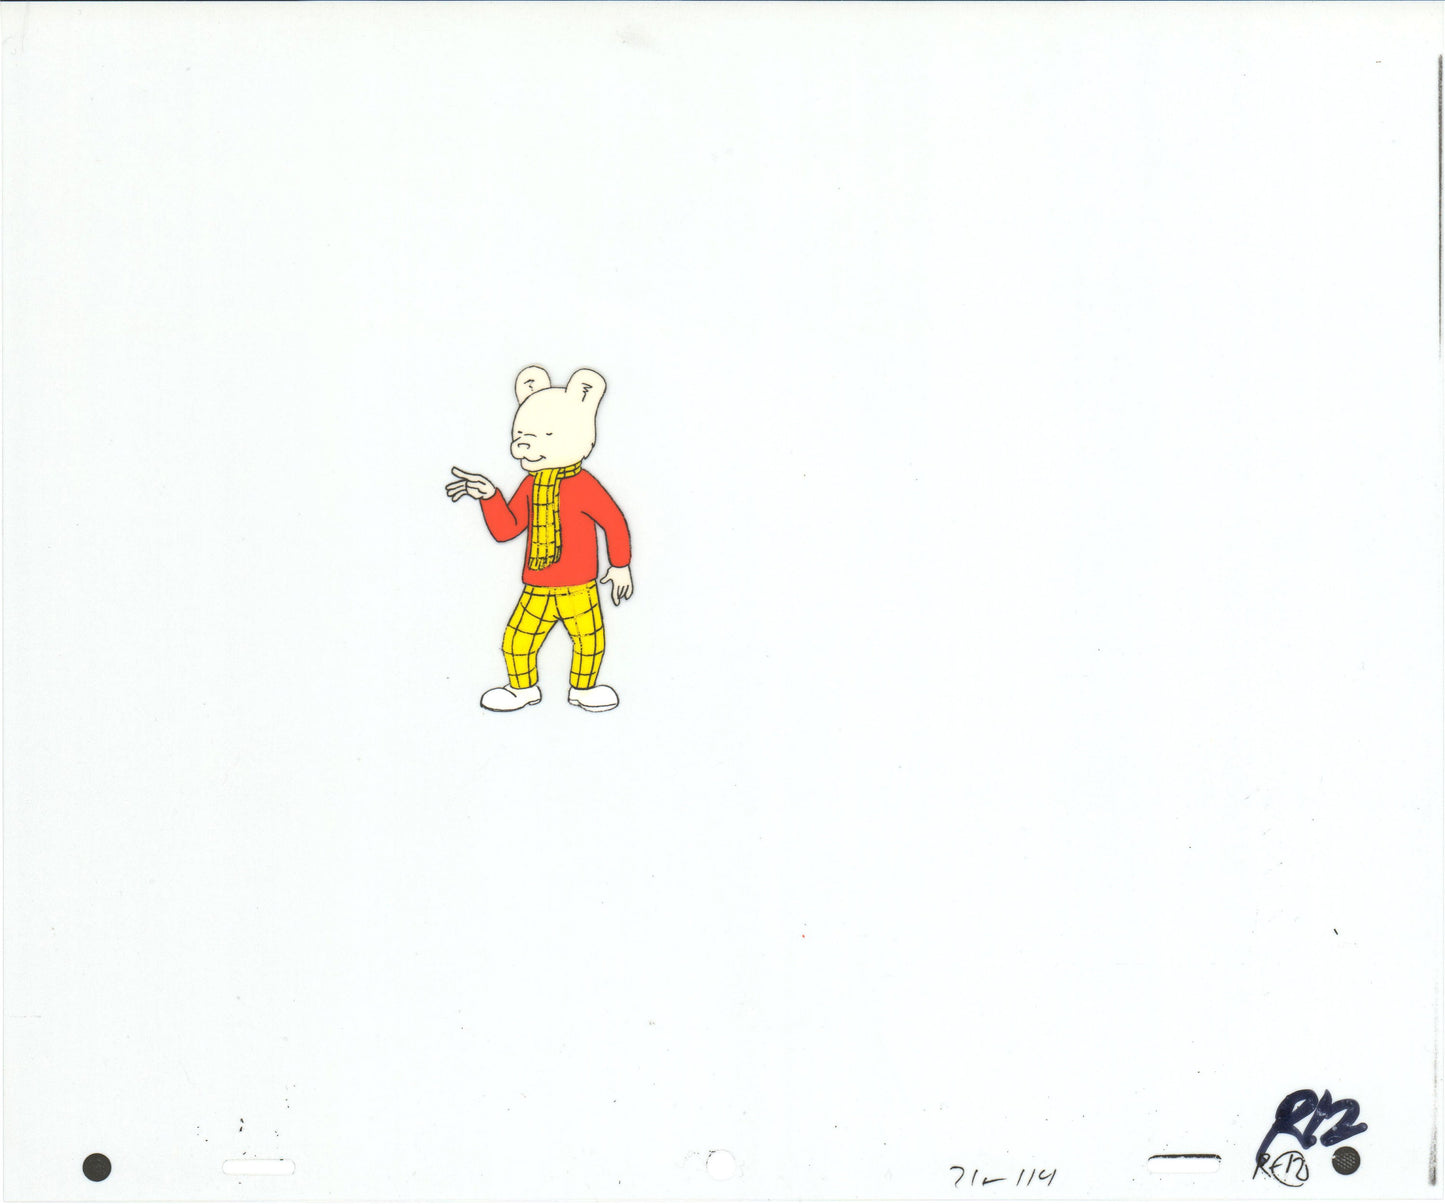 RUPERT Bear Original Production Animation Cel and Drawing from the Cartoon by Nelvana Tourtel Animation 1990s B70287